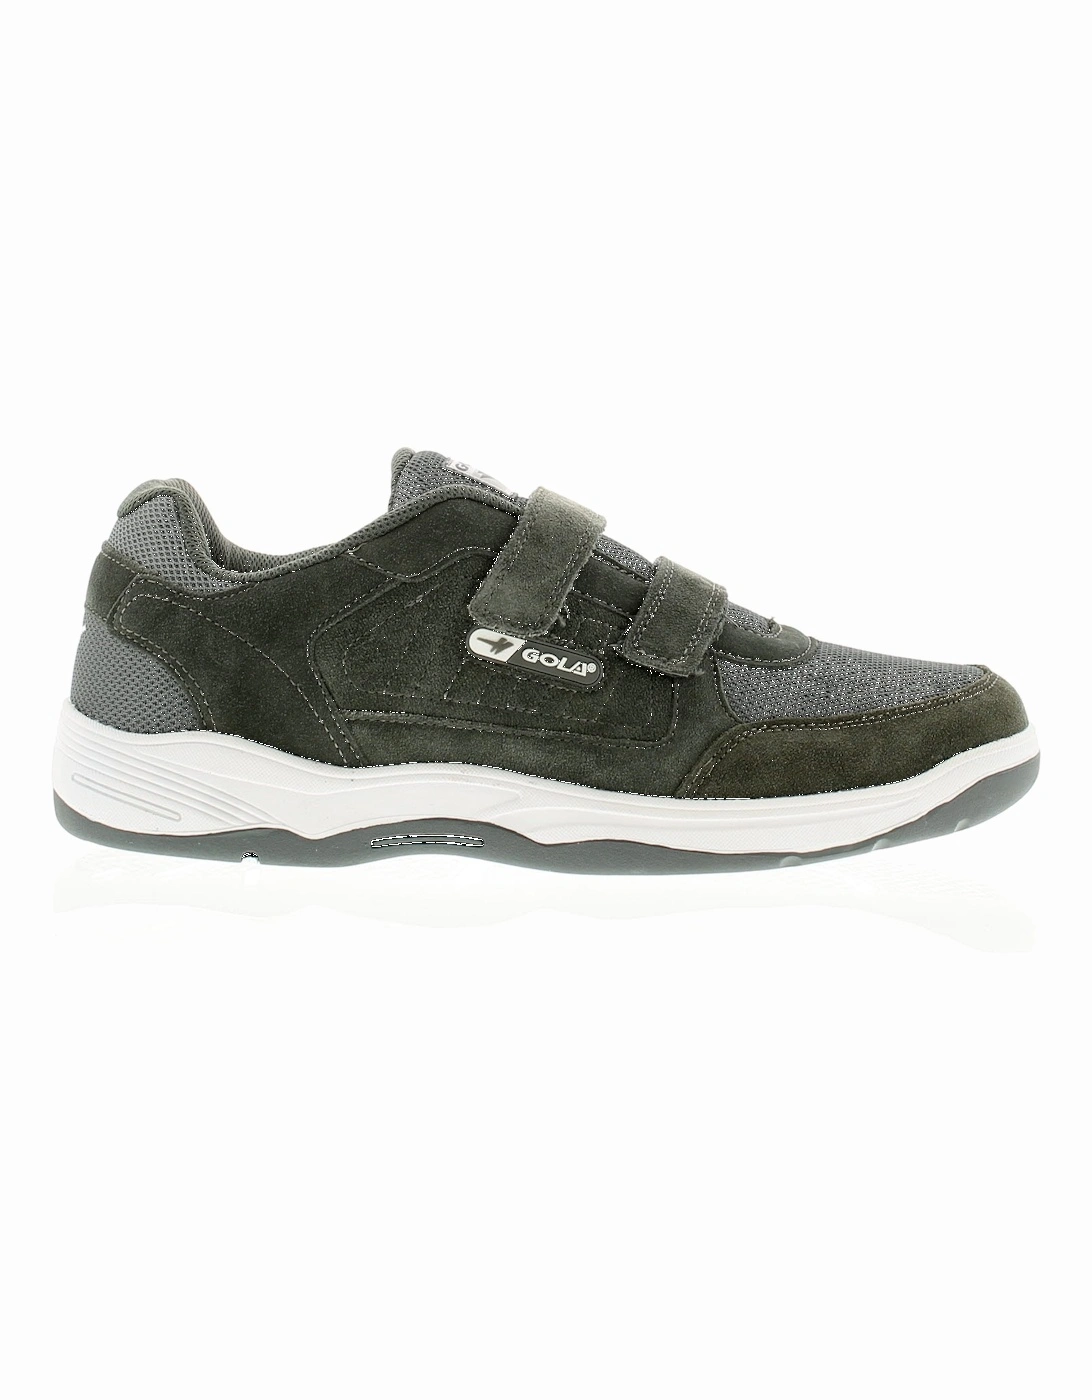 Mens Trainers Belmont Suede Wide Fit Touch Fastening charcoal UK Size